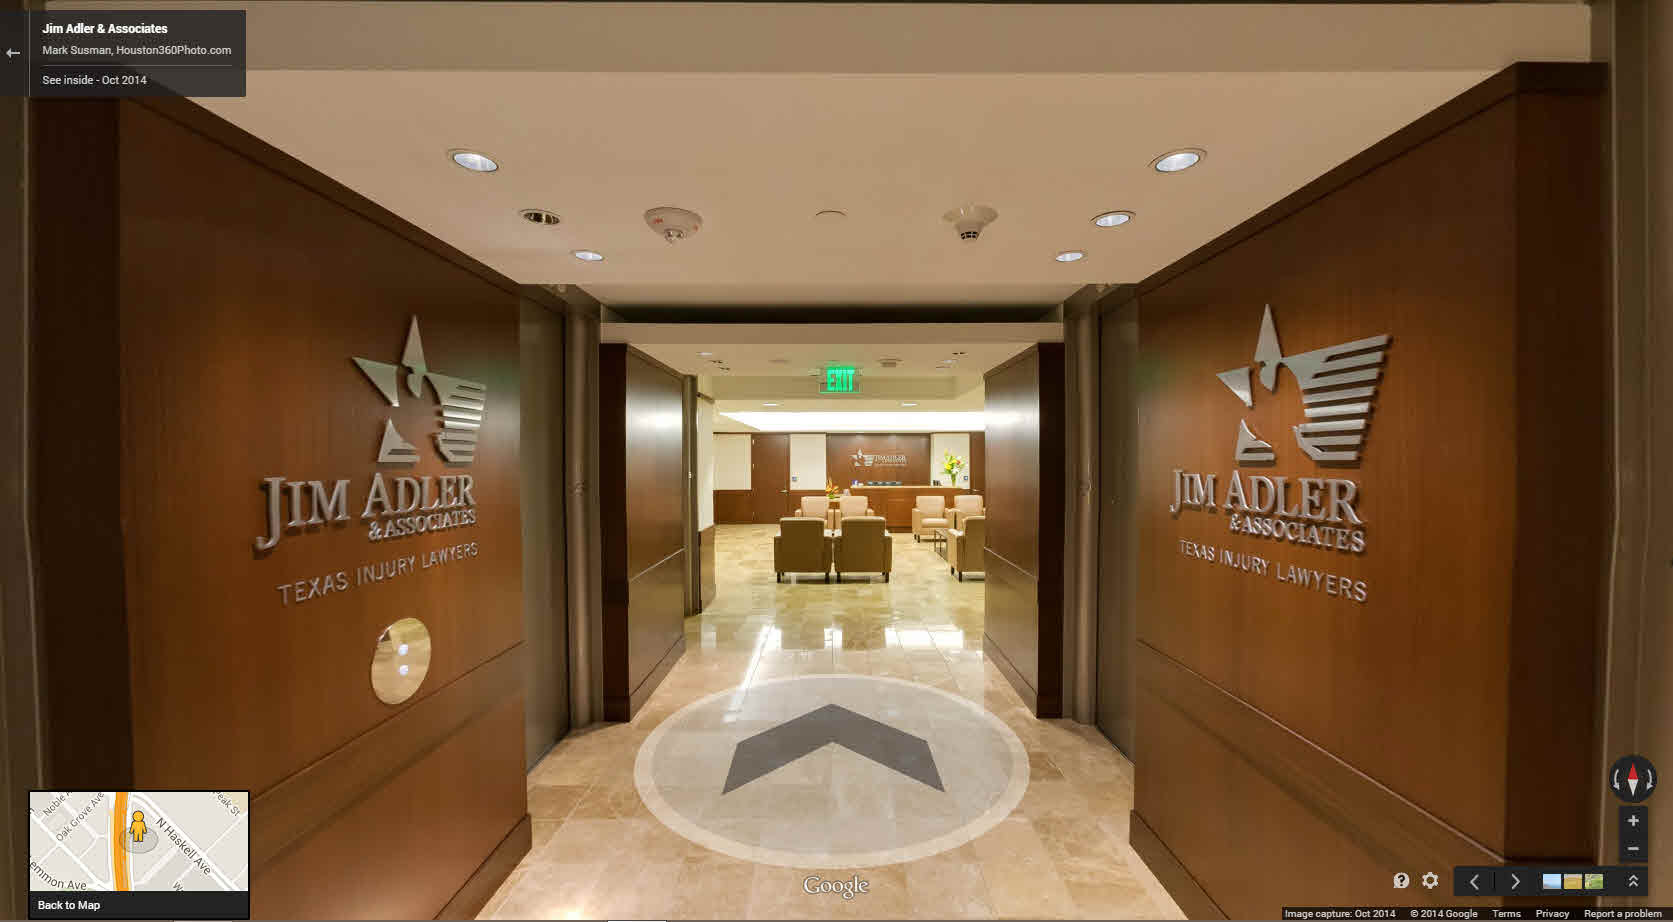 Texas Hammer Embraces Law Office 360 Pano Virtual Tours